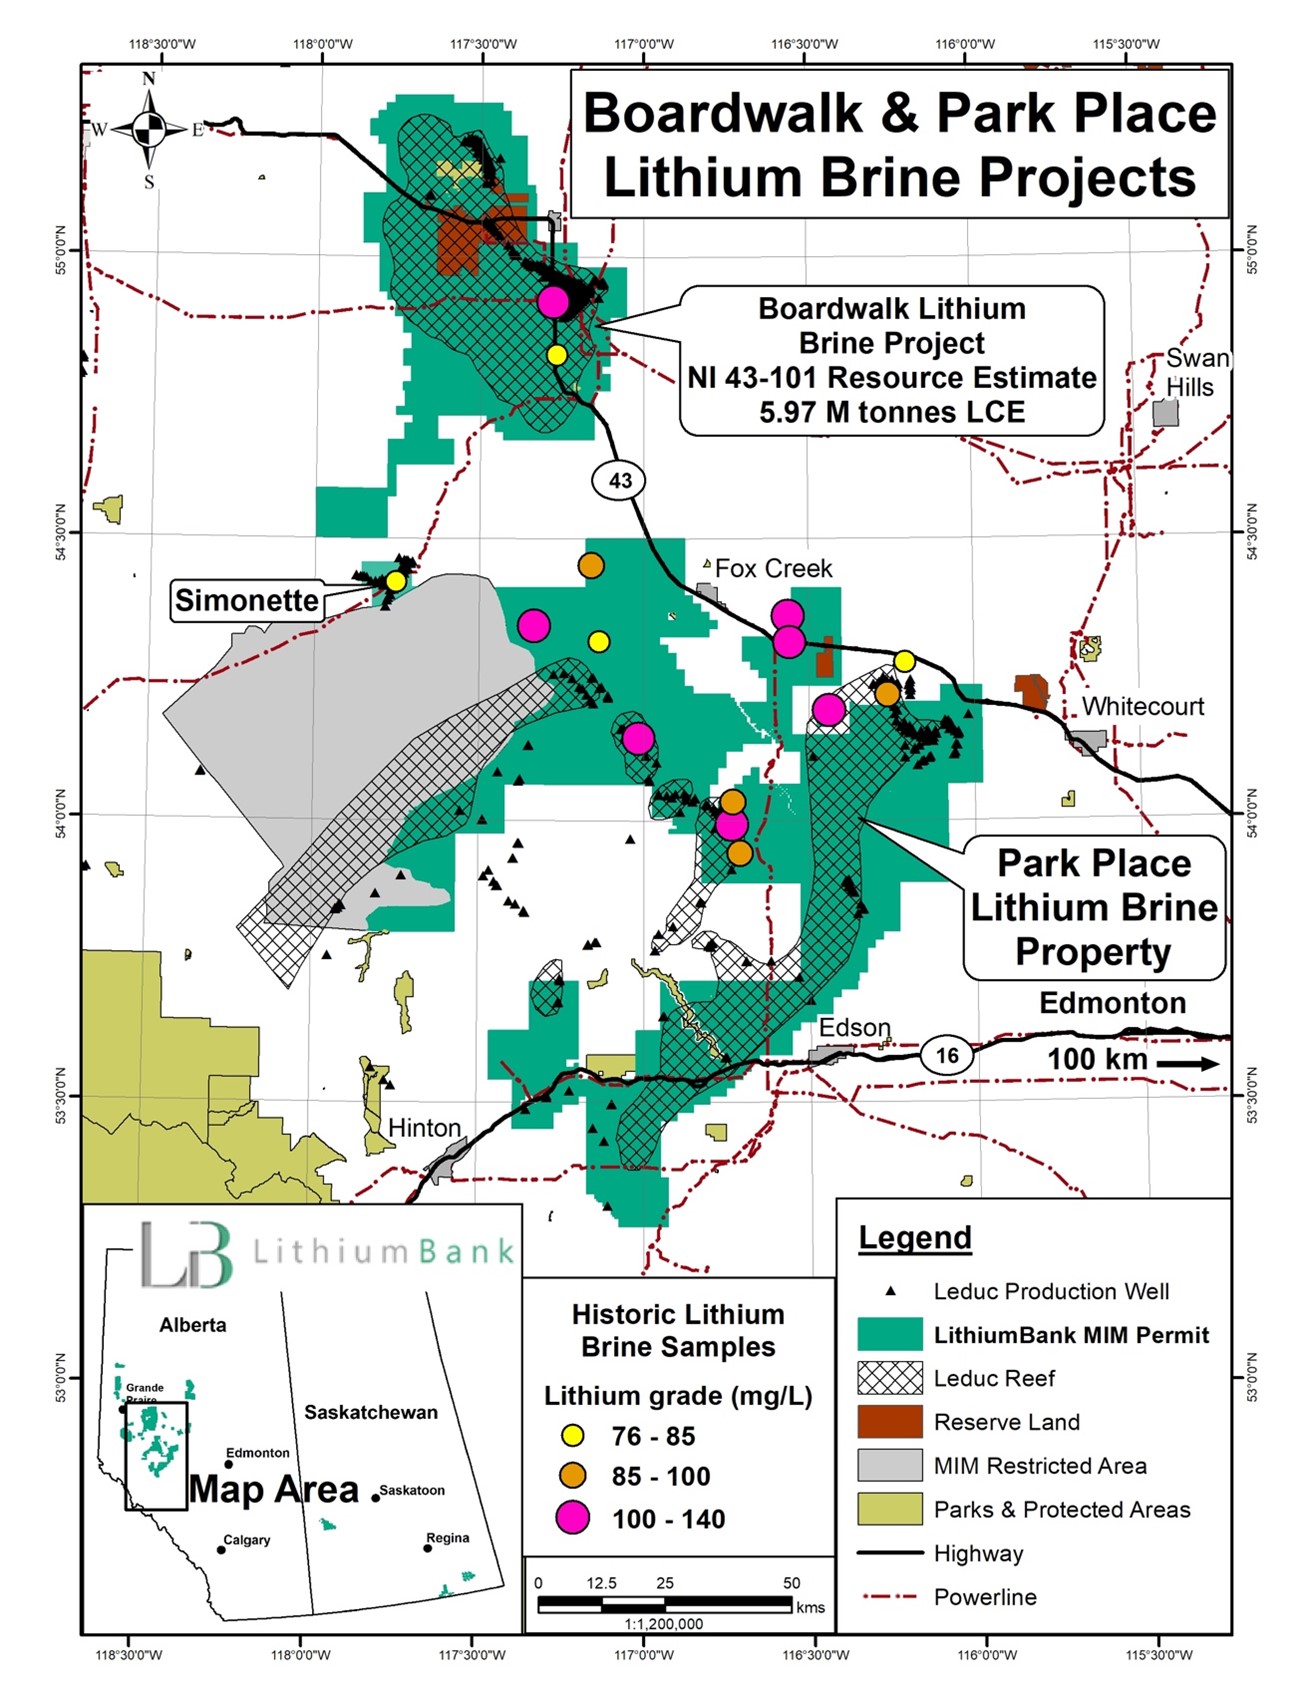 Location of historic lithium brine samples from LithiumBank's Park Place Lithium Brine Project